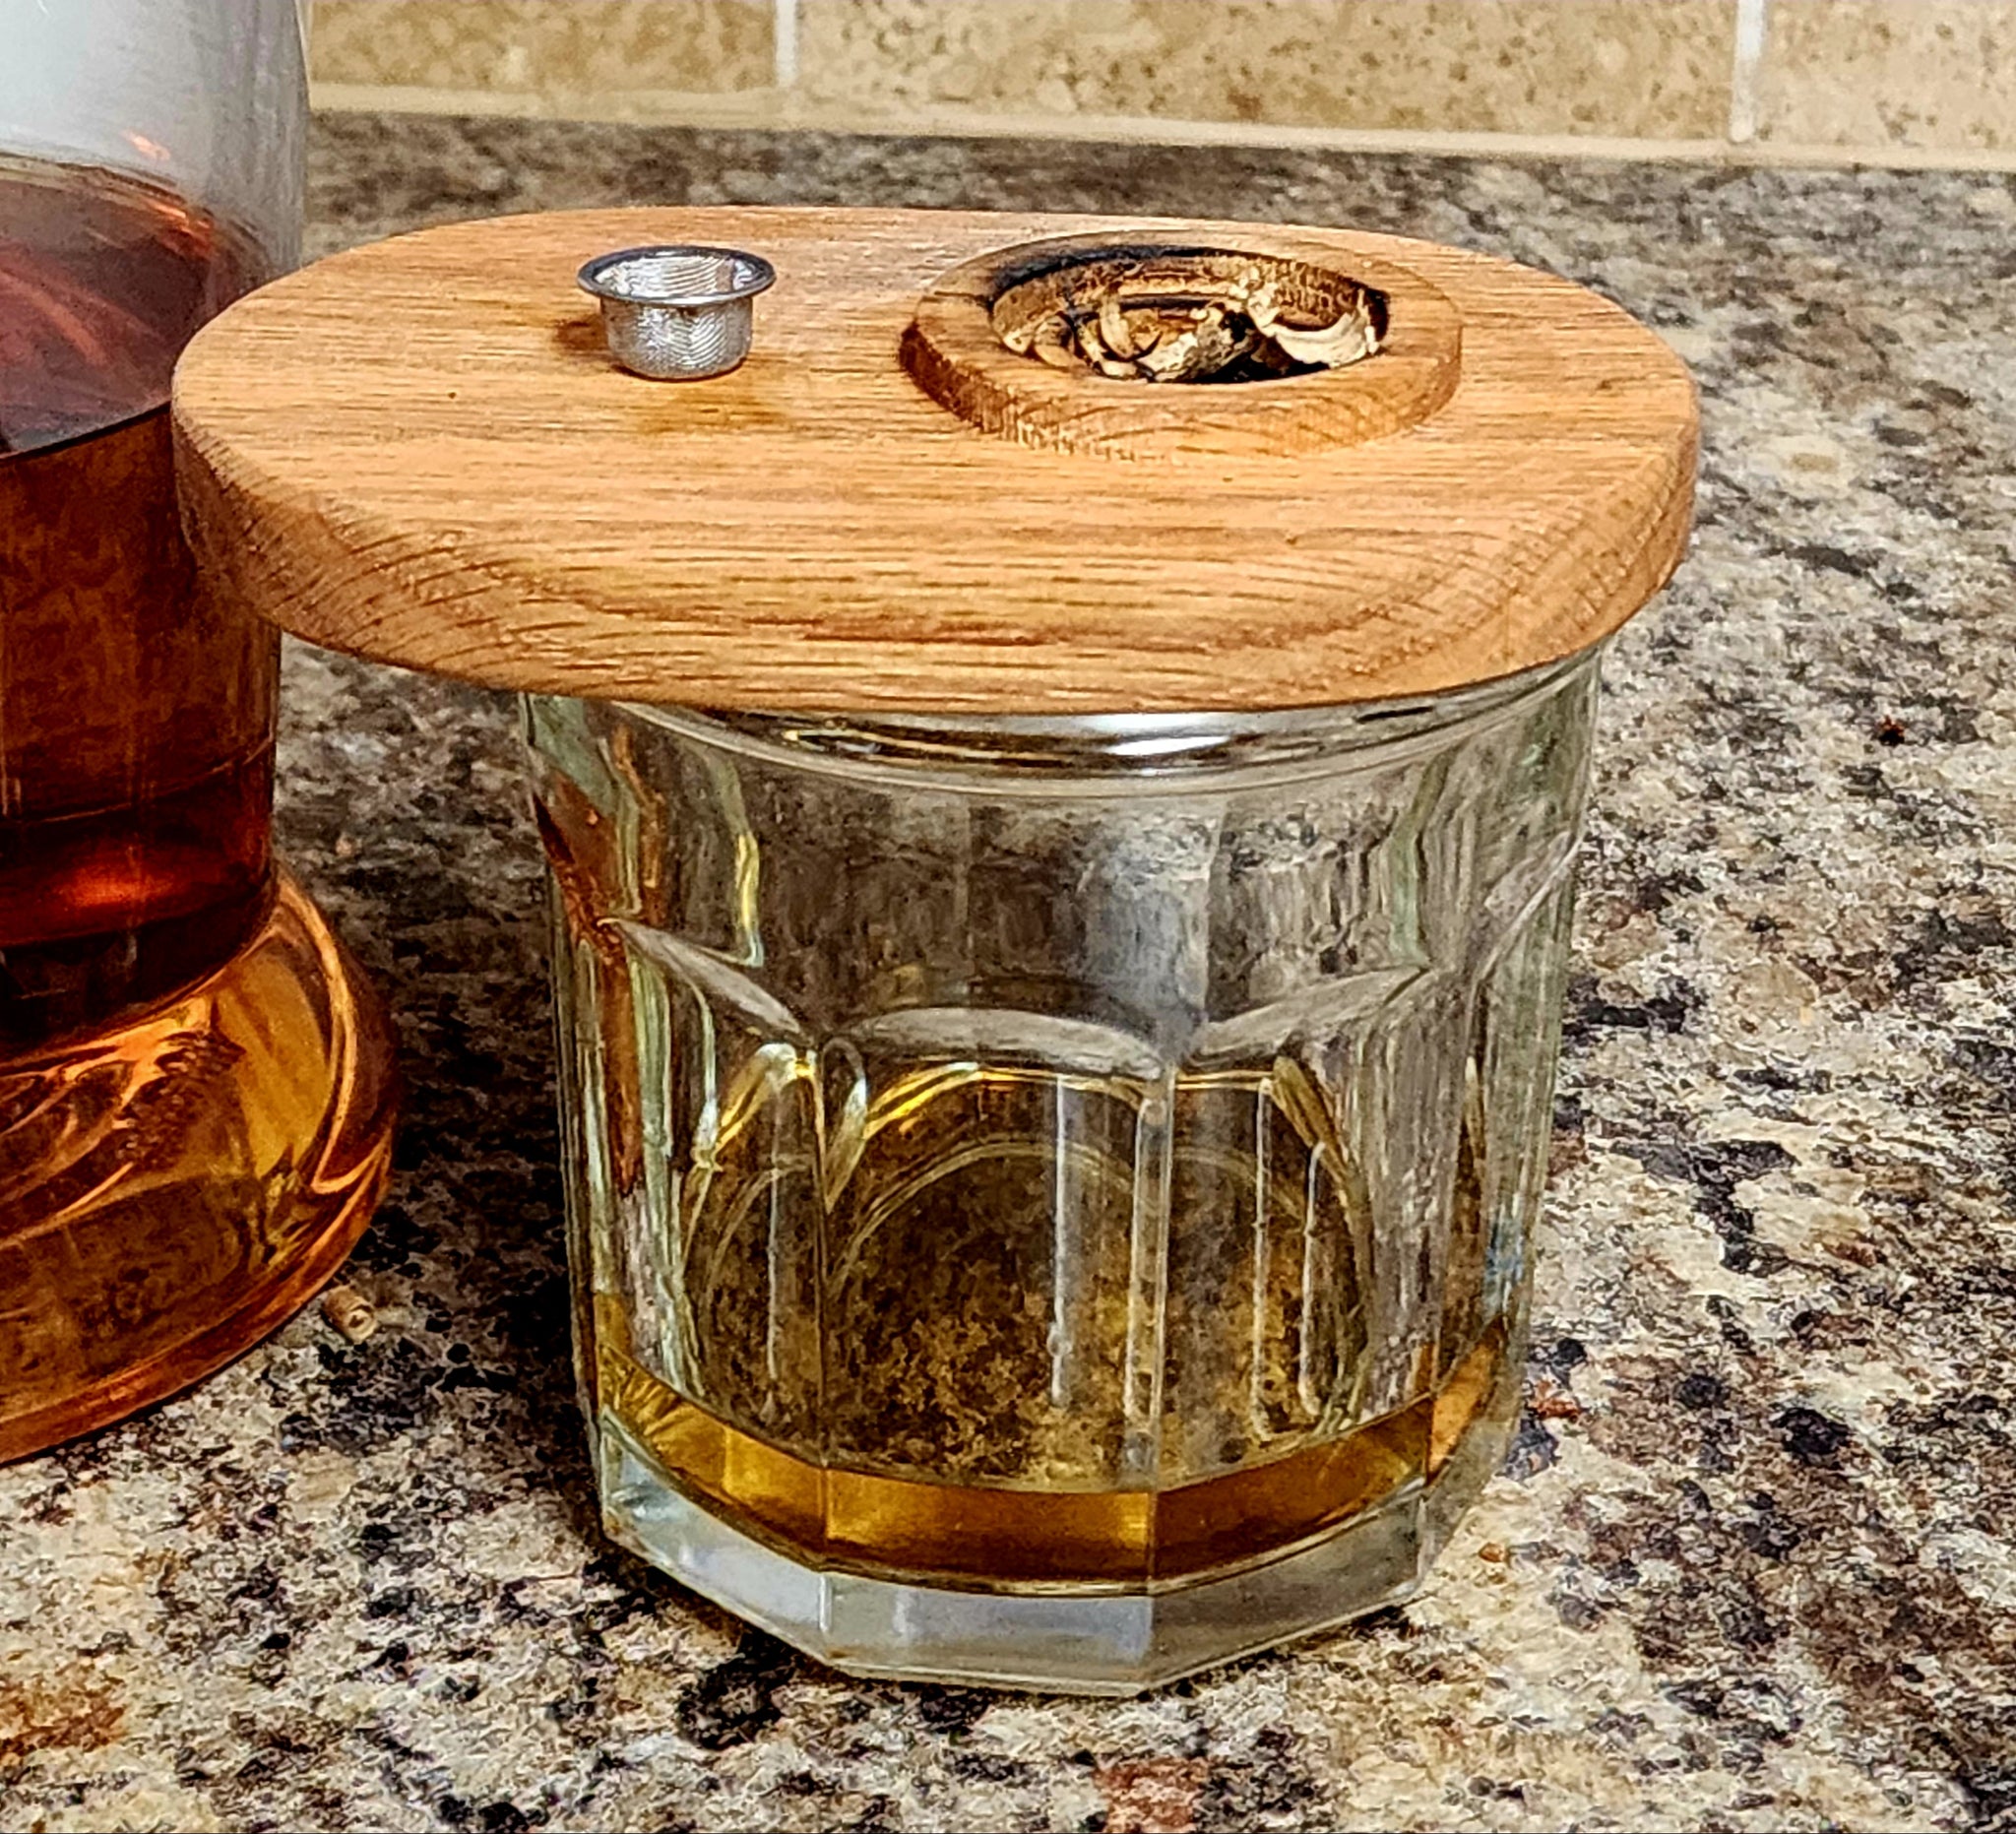 Whiskey Smoker With Extra Screen and Oak and Cherry Shavings